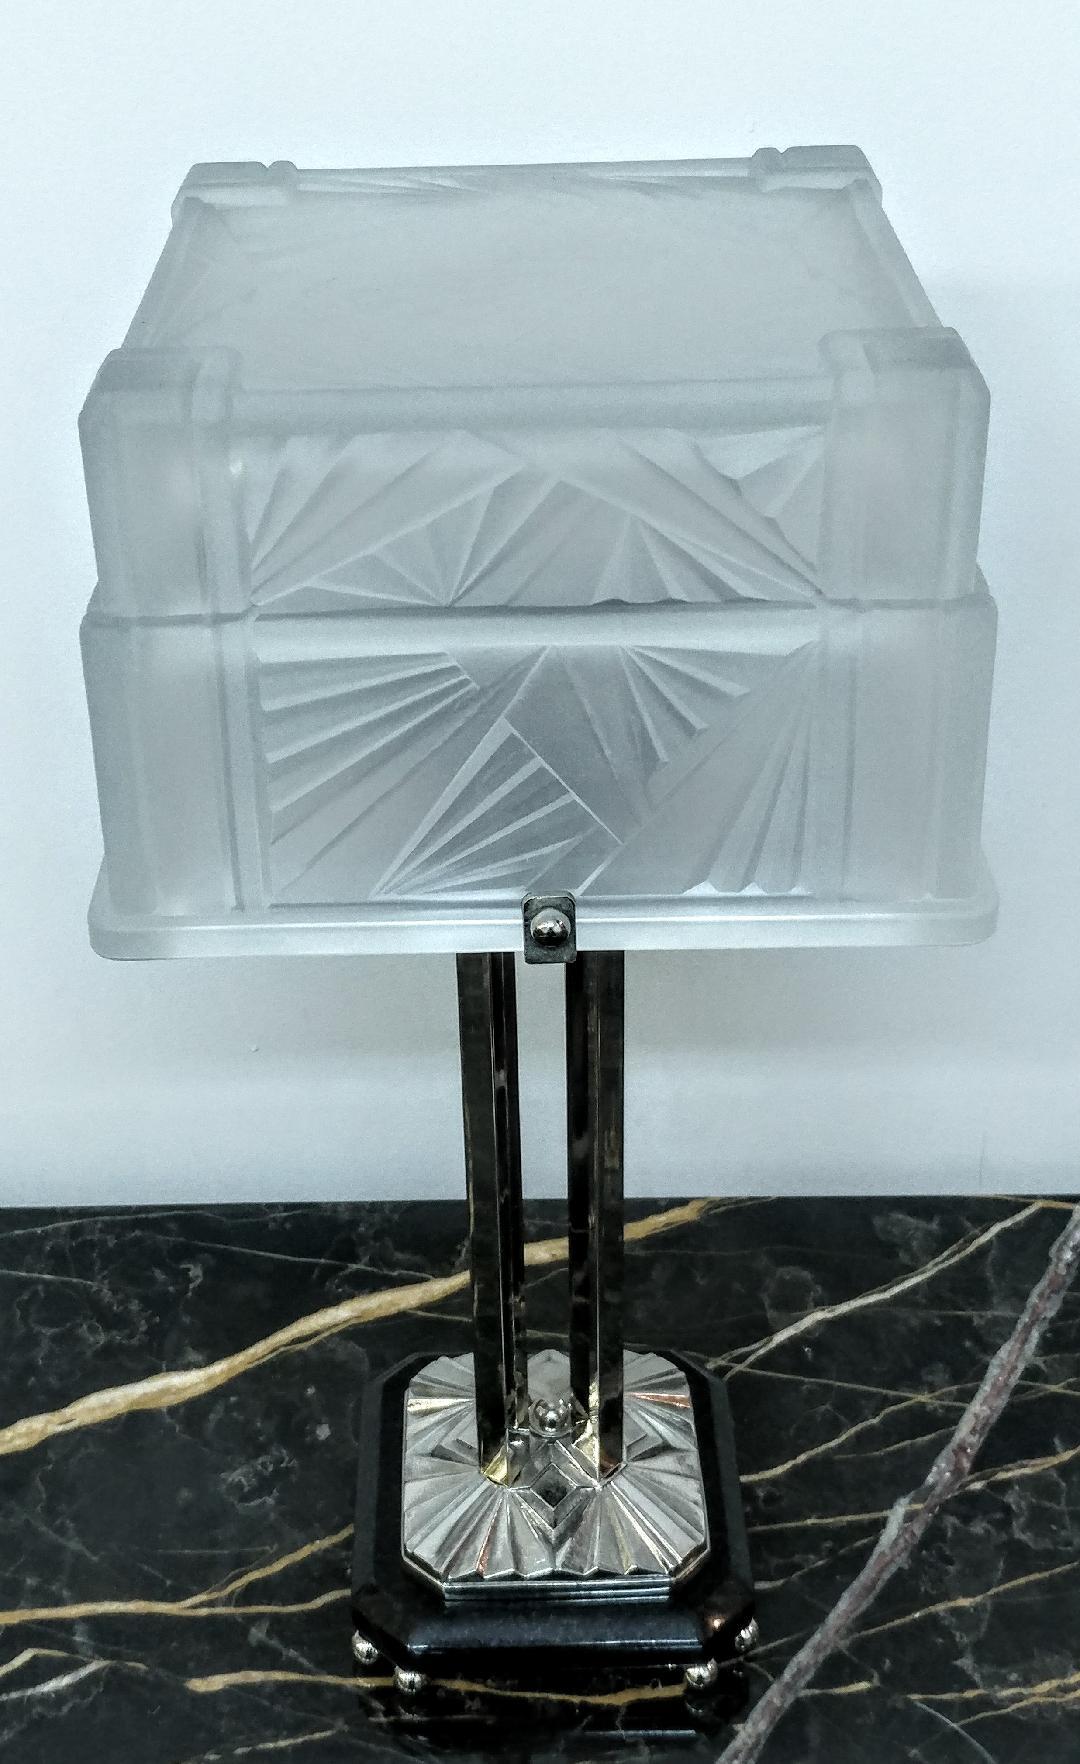 A stunning pair of French Art Deco table lamps were created by E.J.G. The square glass shade consists of a two-tiered design. Enhanced by typical French Art Deco geometric patterns motifs throughout. In clear frosted with polished details with a